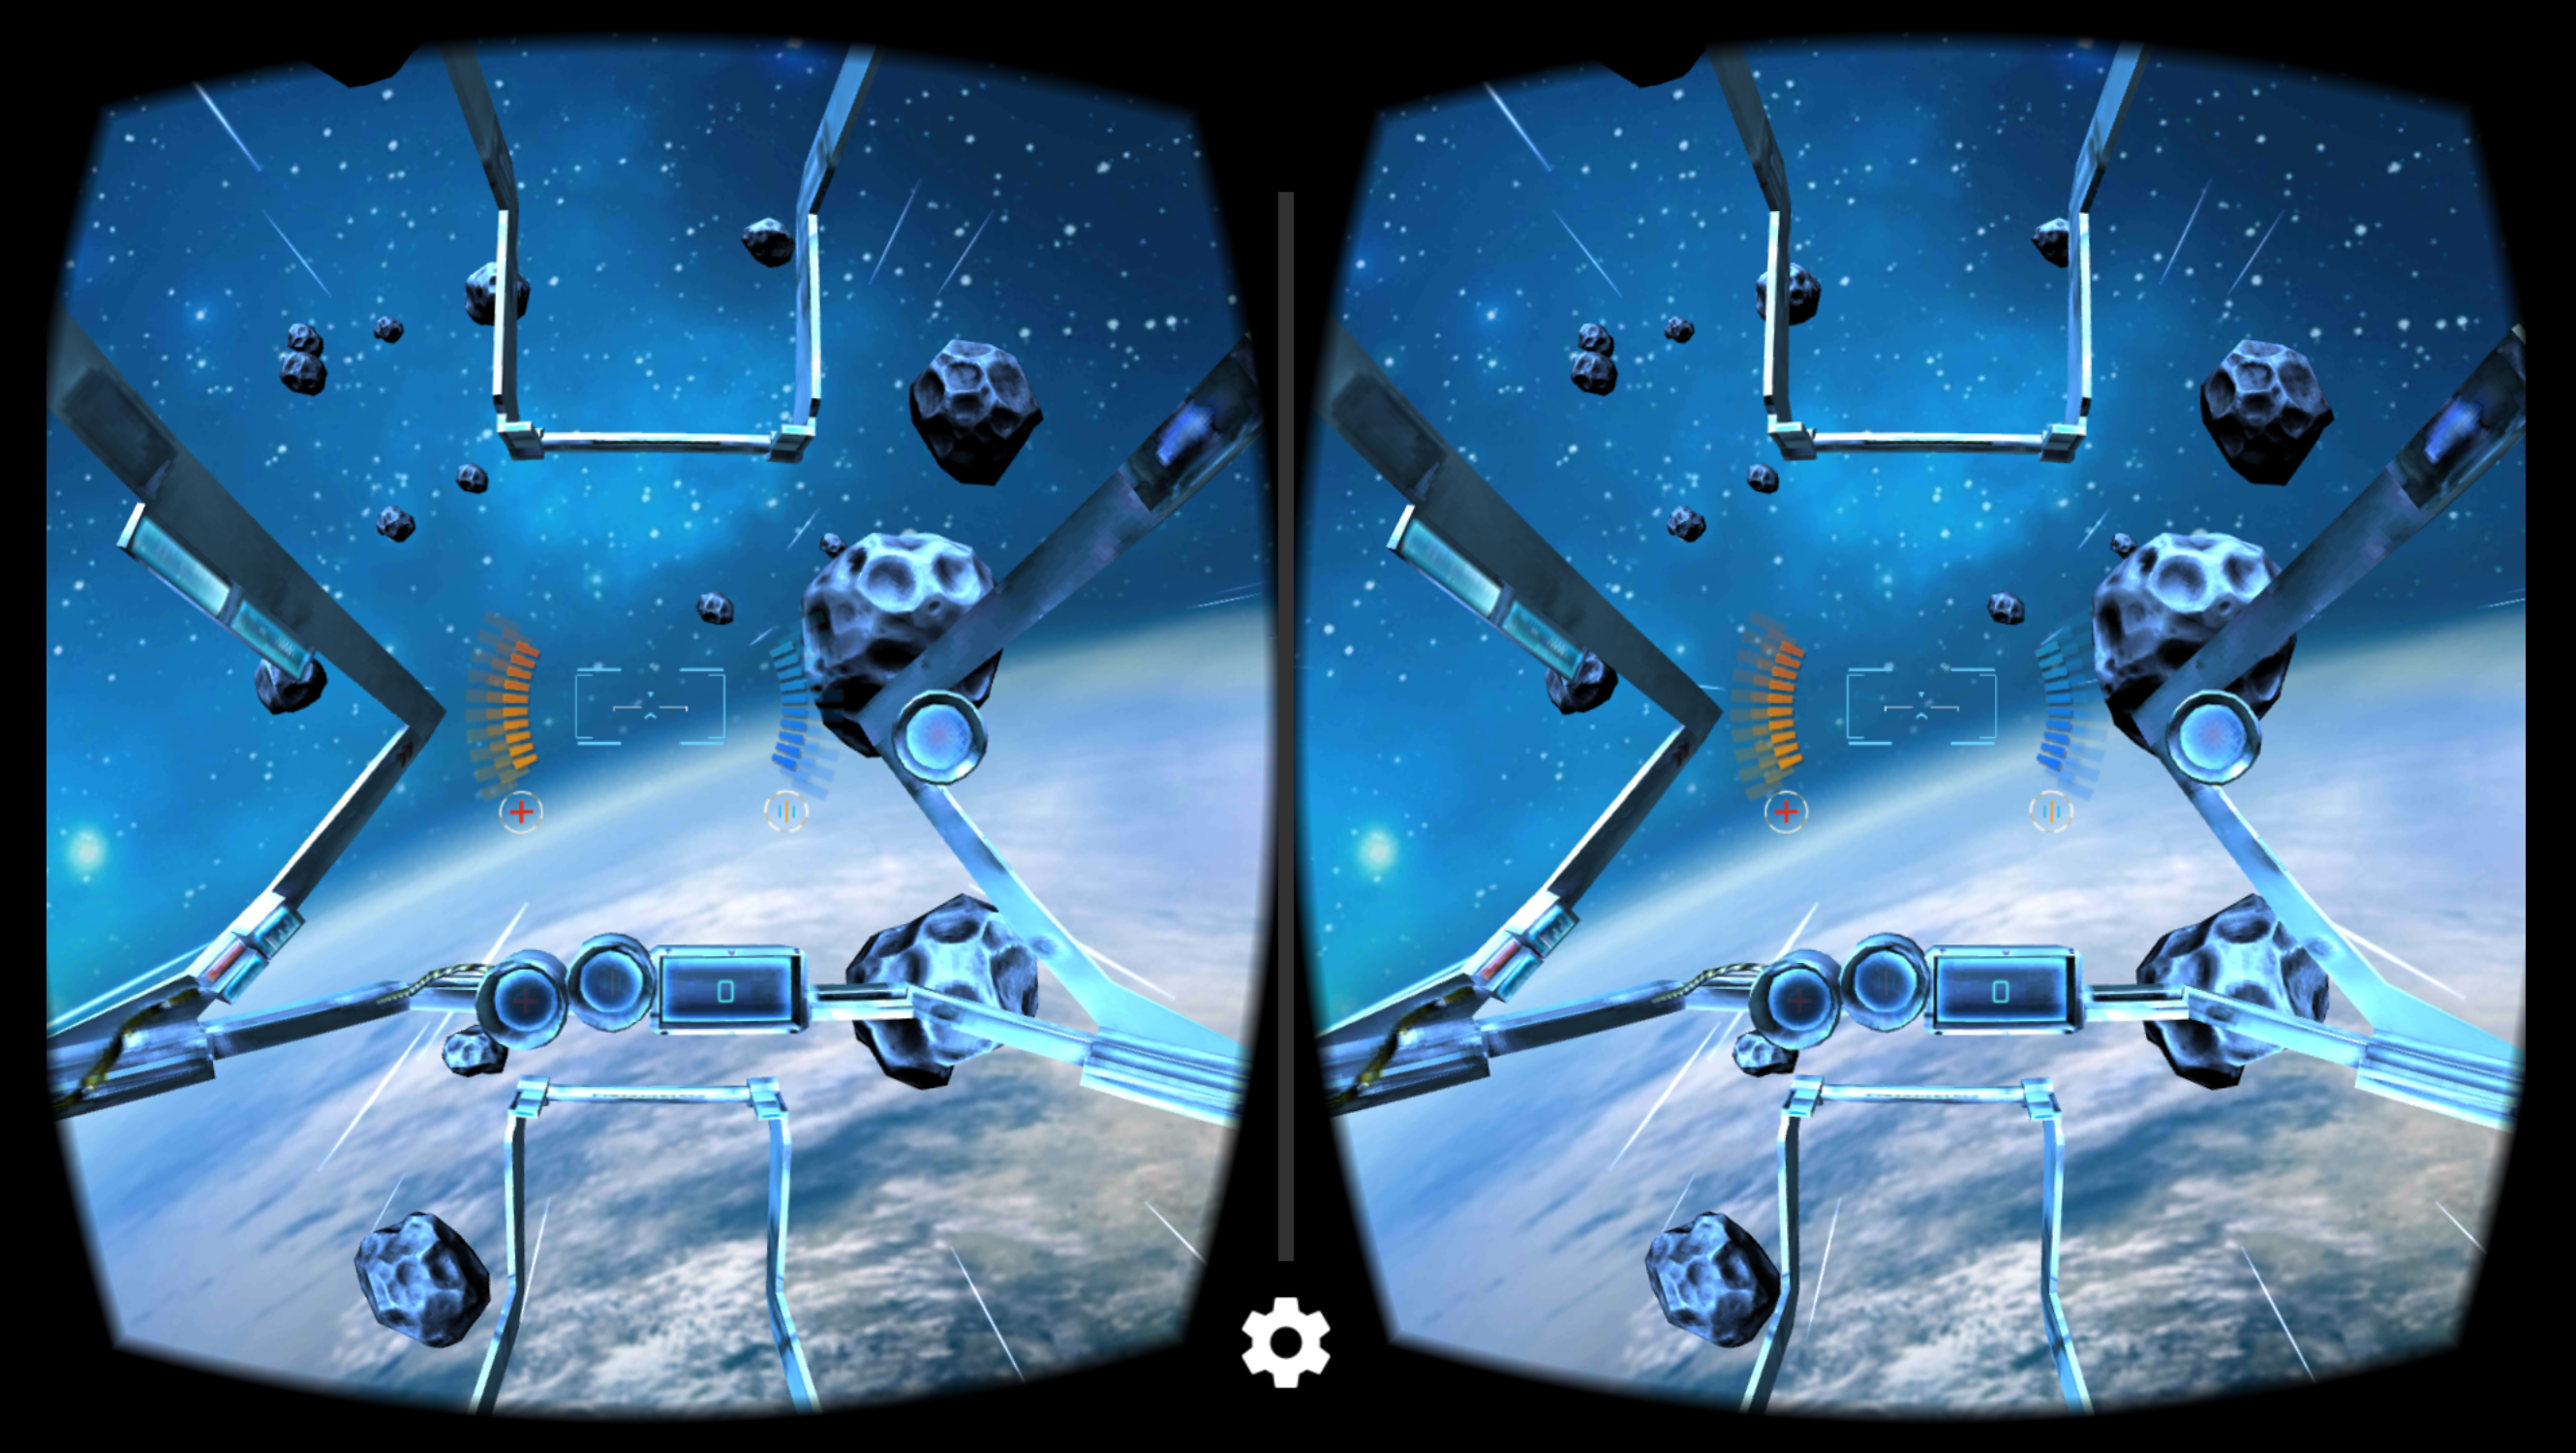 vr mobile games with controller